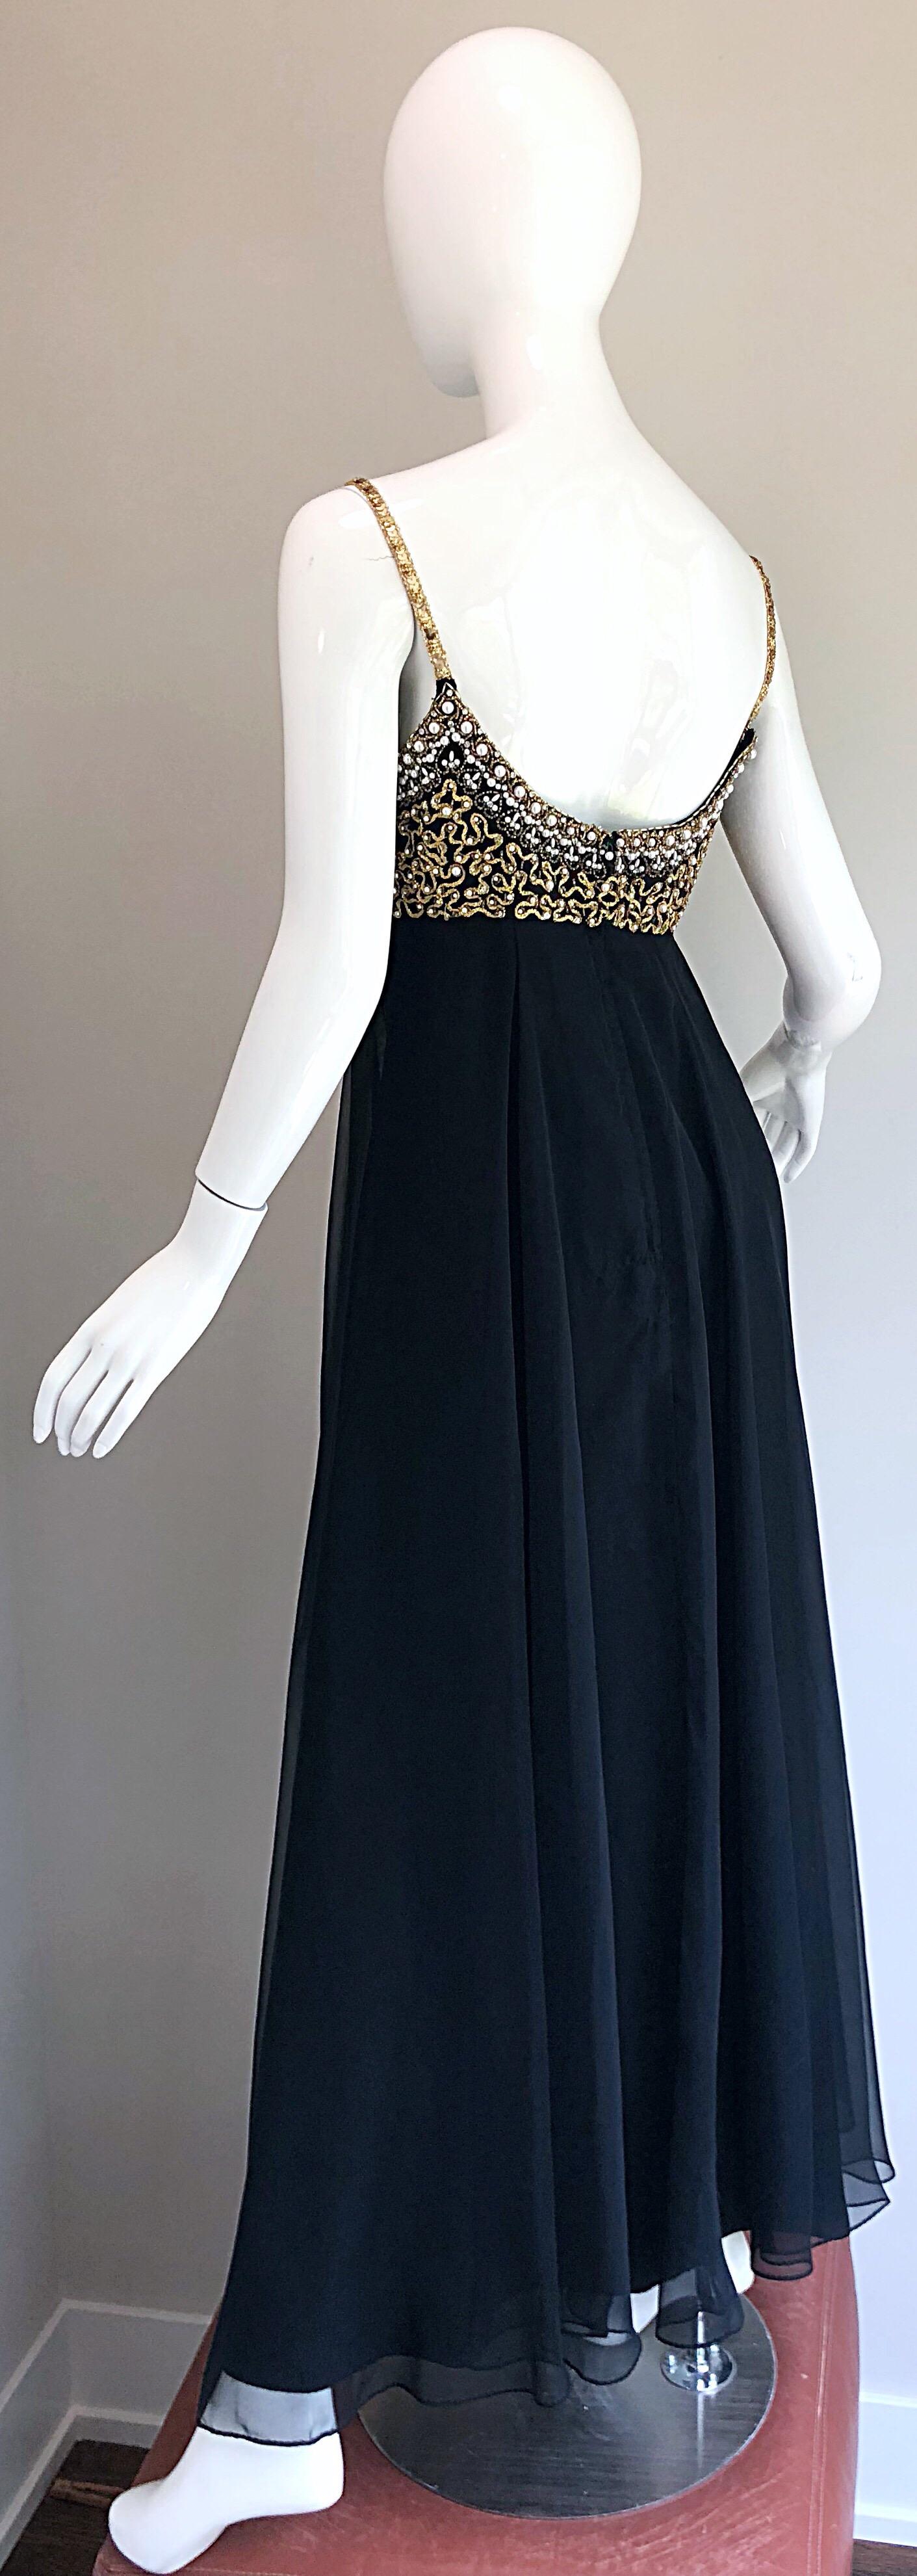 1970s Black + Gold Pearl + Rhinestone Encrusted Vintage 70s Chiffon Evening Gown For Sale 3